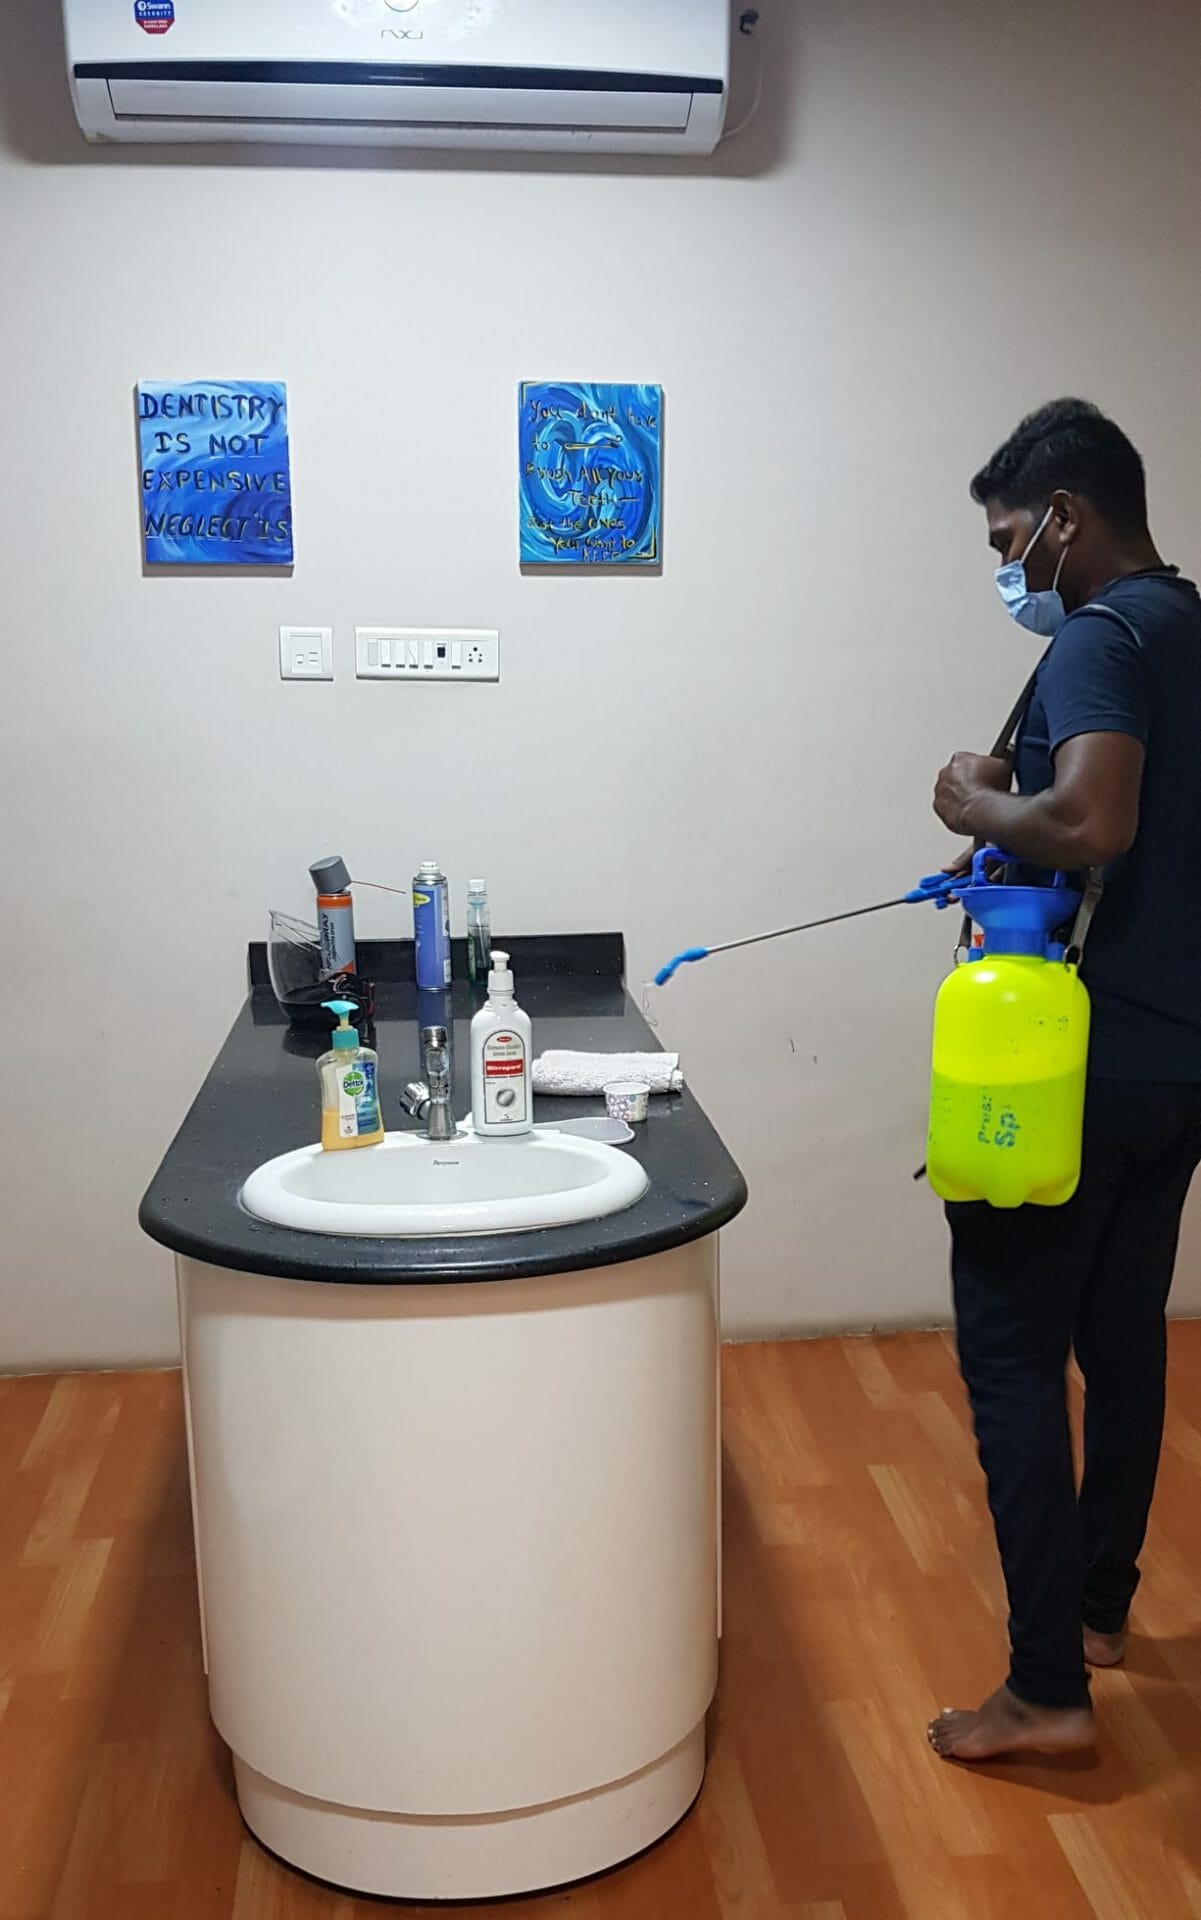 A sanitation worker cleaning the dental clinic work area with a yellow disinfectant sprayer